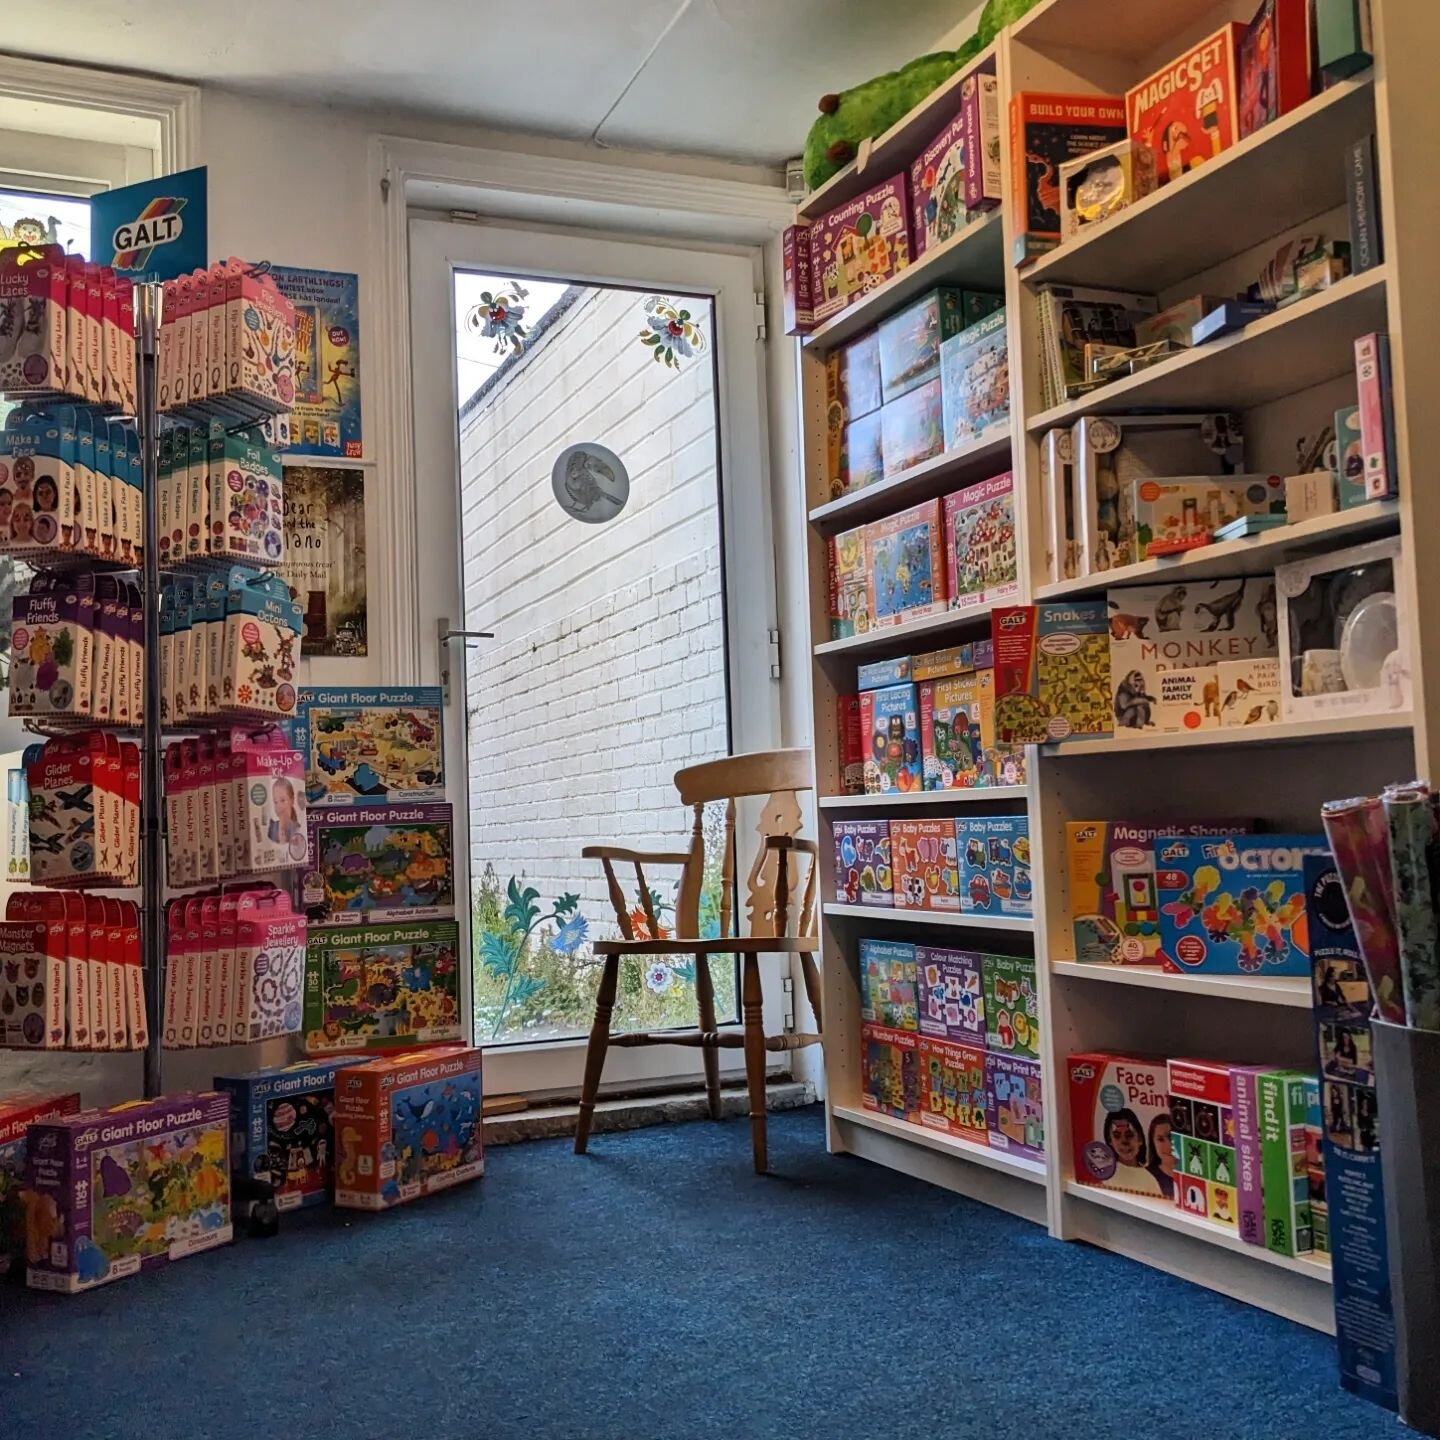 Paul did an amazing job sprucing up our secret room today. We have some new kids' jigsaws and games, maps, and, most importantly, loads more books in the sale! Ding dong!